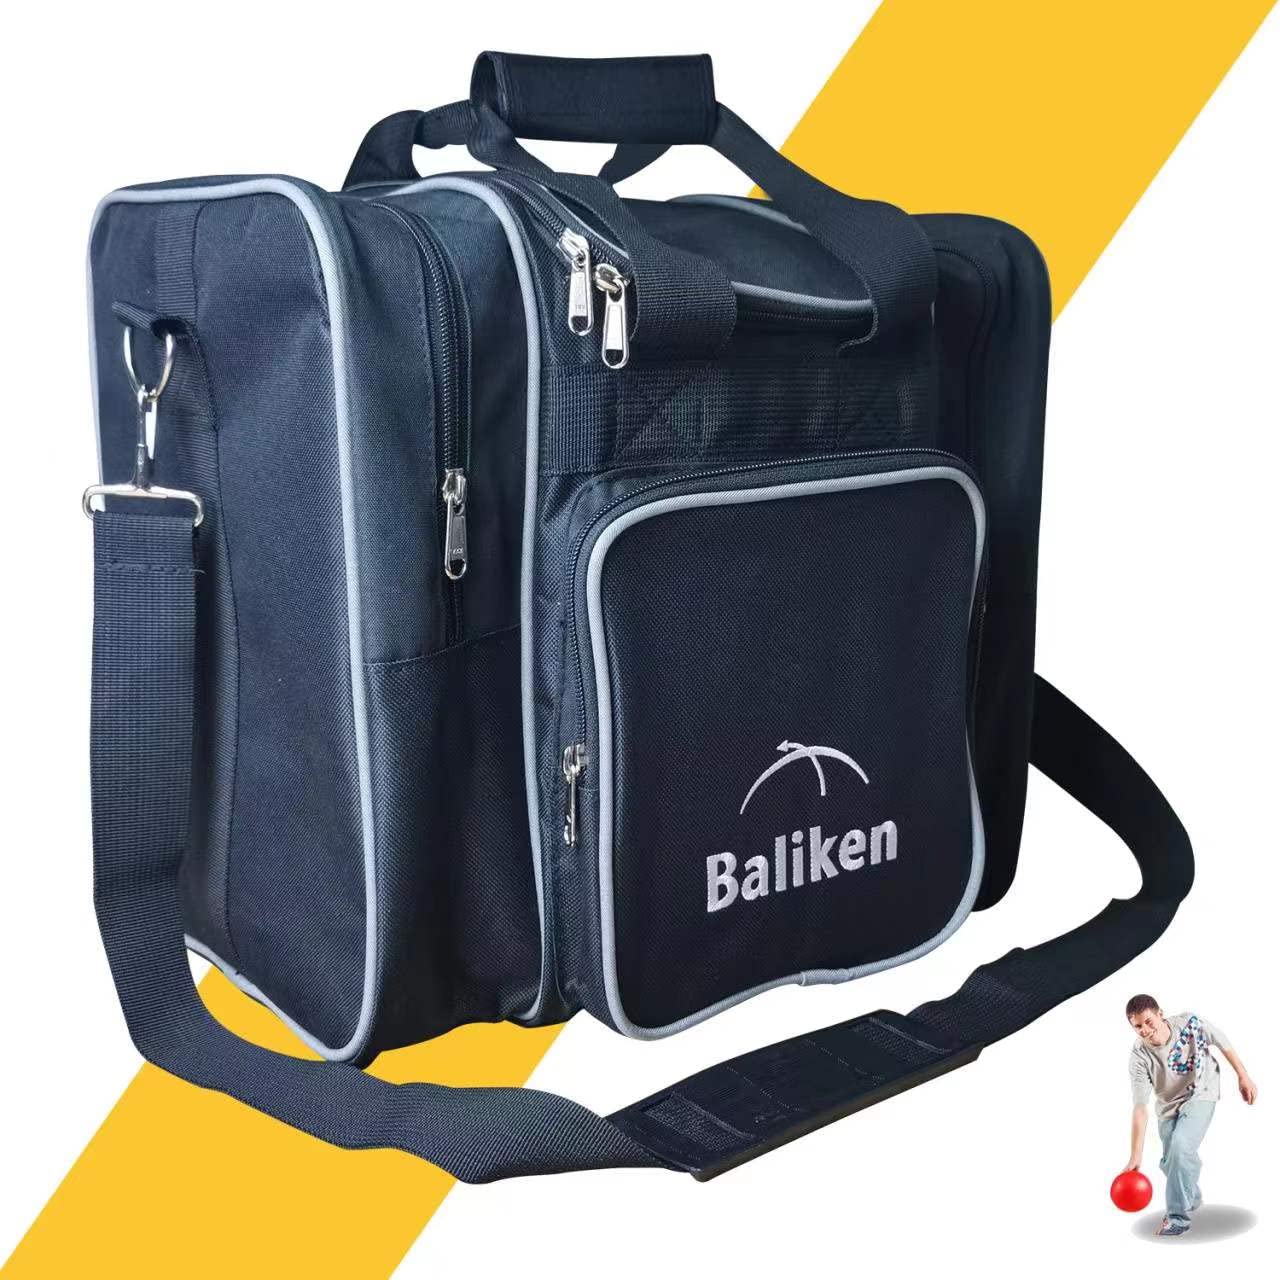 BALIKEN Single Bowling Ball Tote- Holds One Bowling Ball One Pair